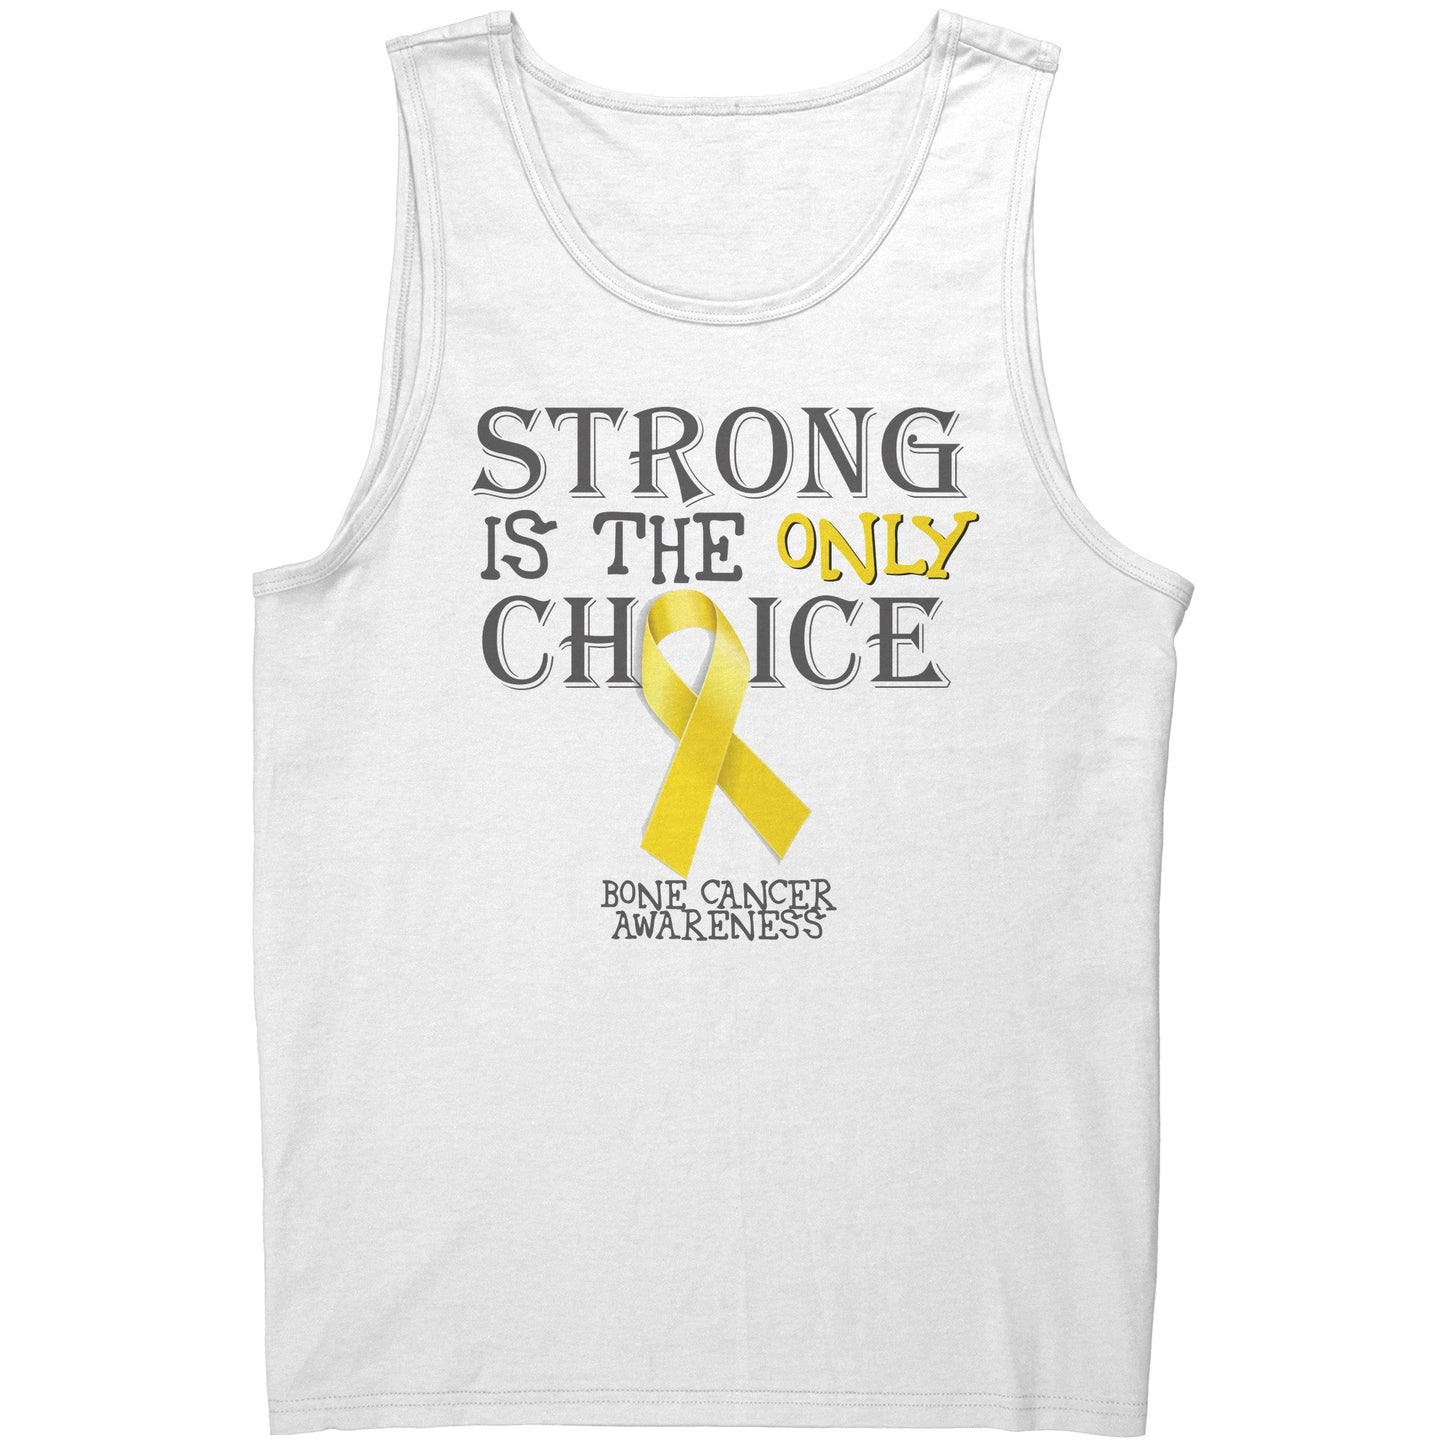 Strong is the Only Choice -Bone Cancer Awareness T-Shirt, Hoodie, Tank |x|